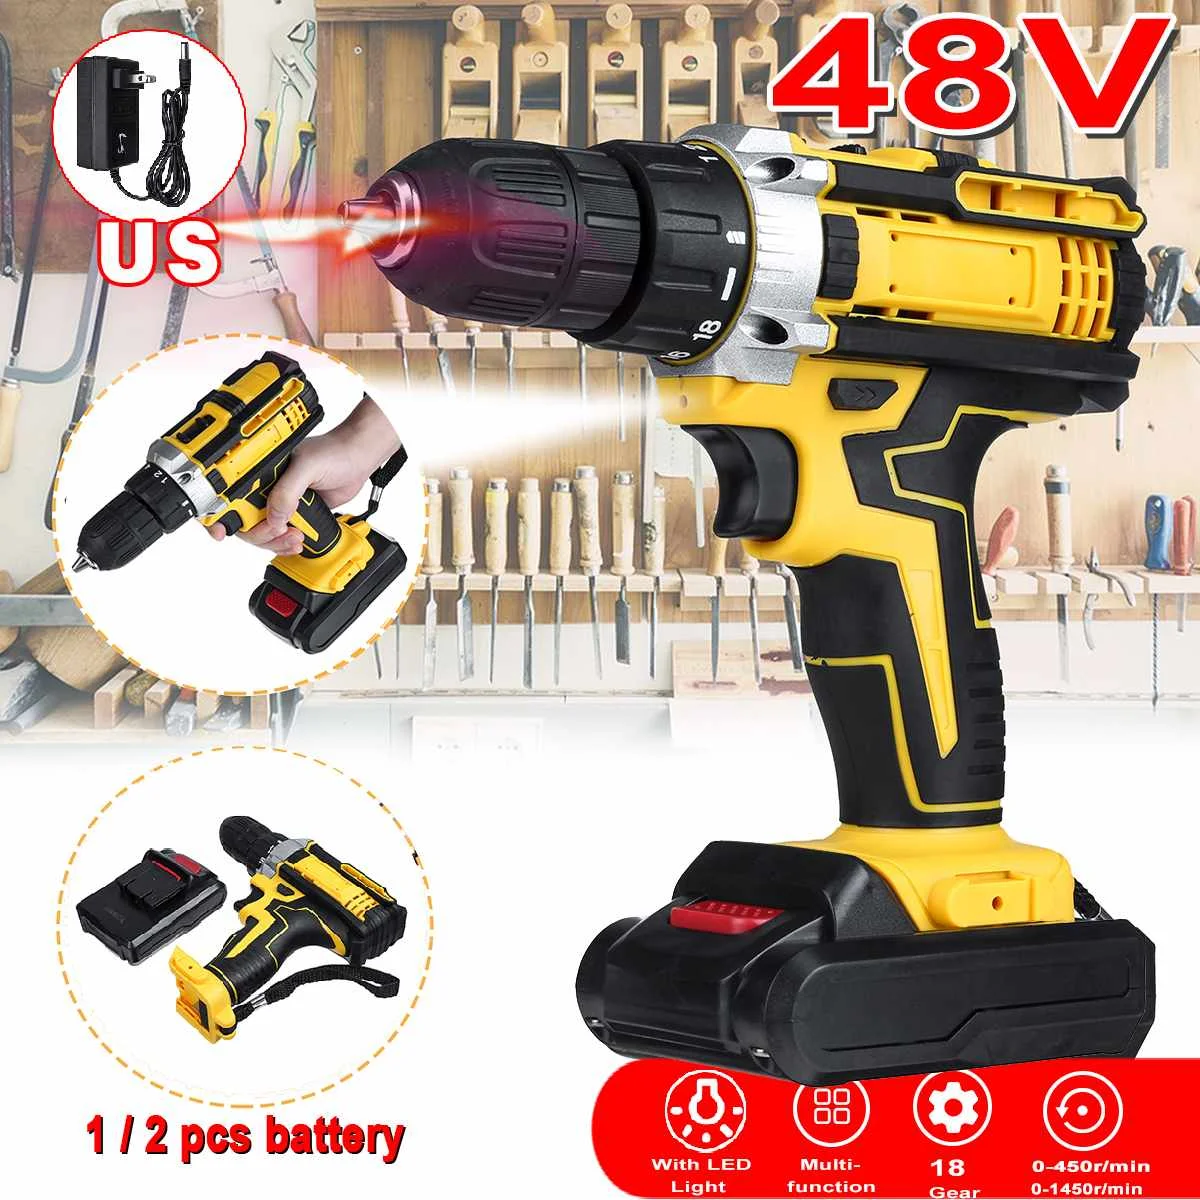 

48V 2 Speeds Adjustment Cordless Electric Drill Brush Motor 18 Gears of Torque Adjustable Holes Drilling Machine Electric Drill